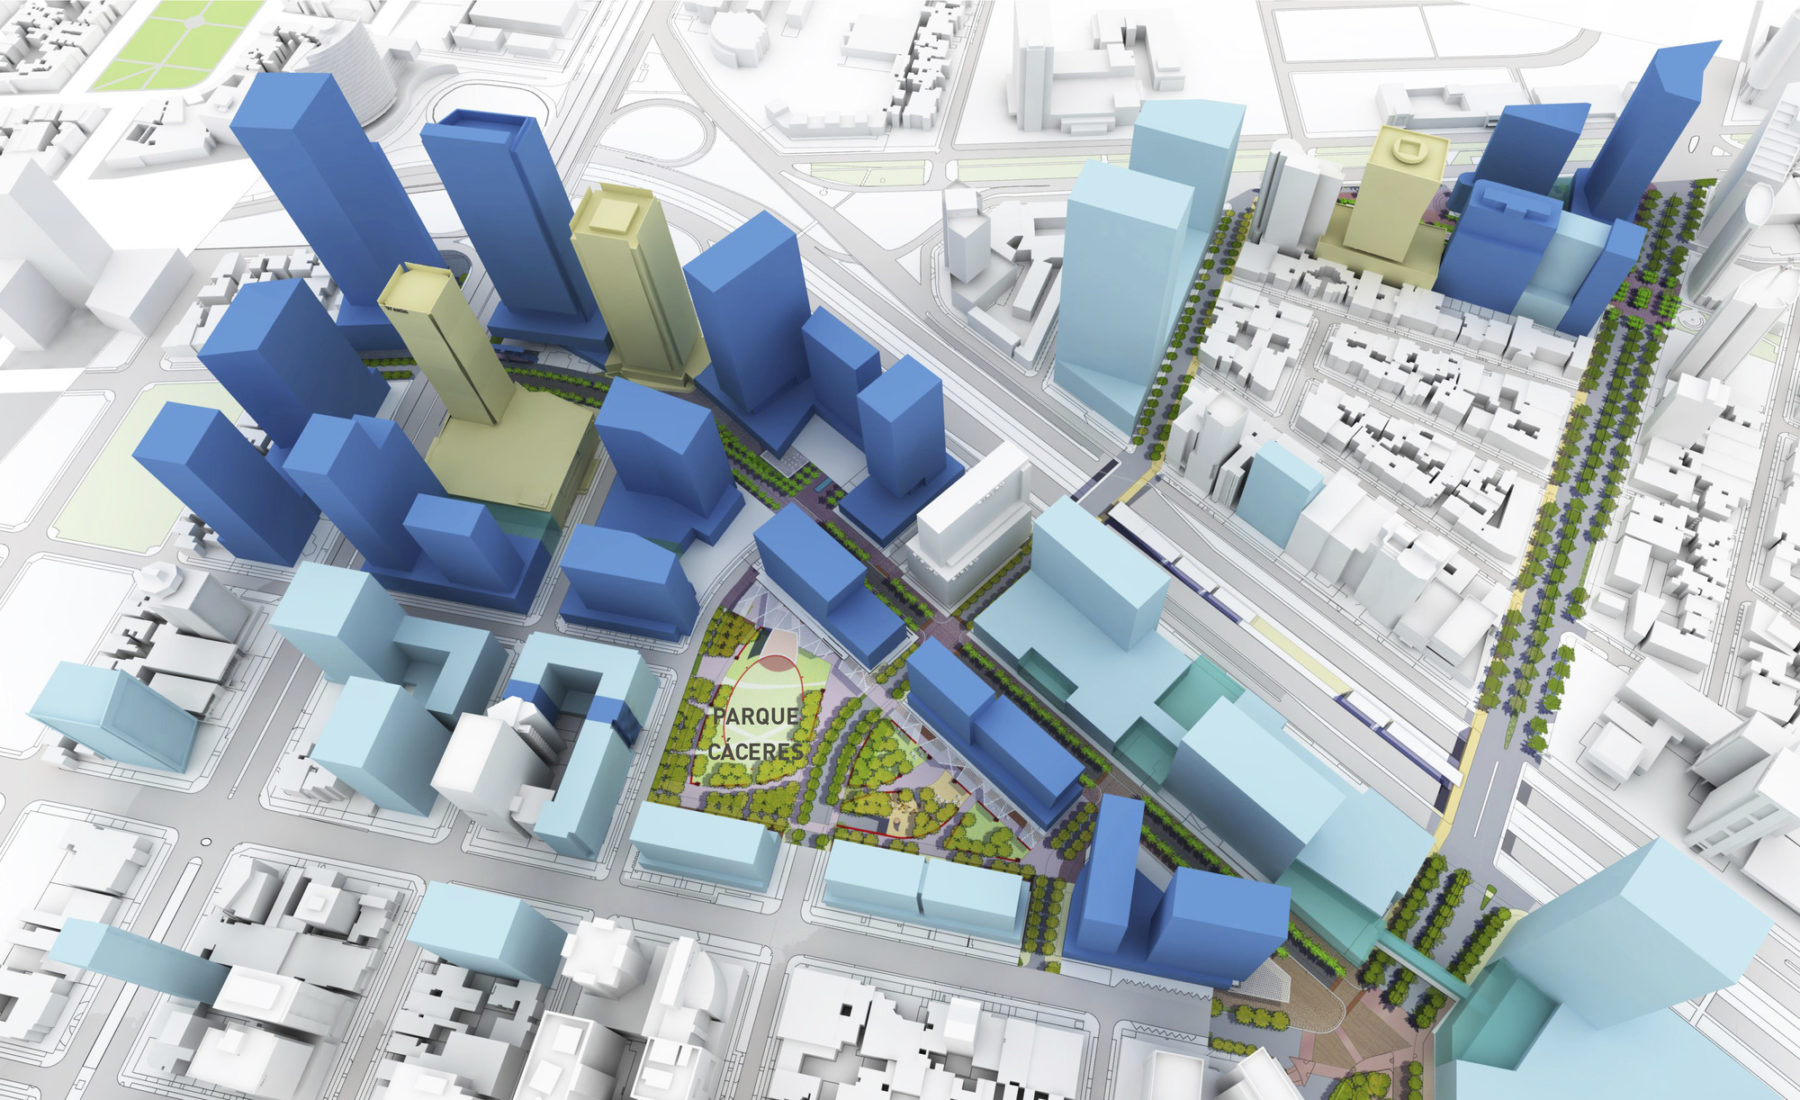 Render of new developments in dark blue, surrounded by existing construction in light blue and beige.